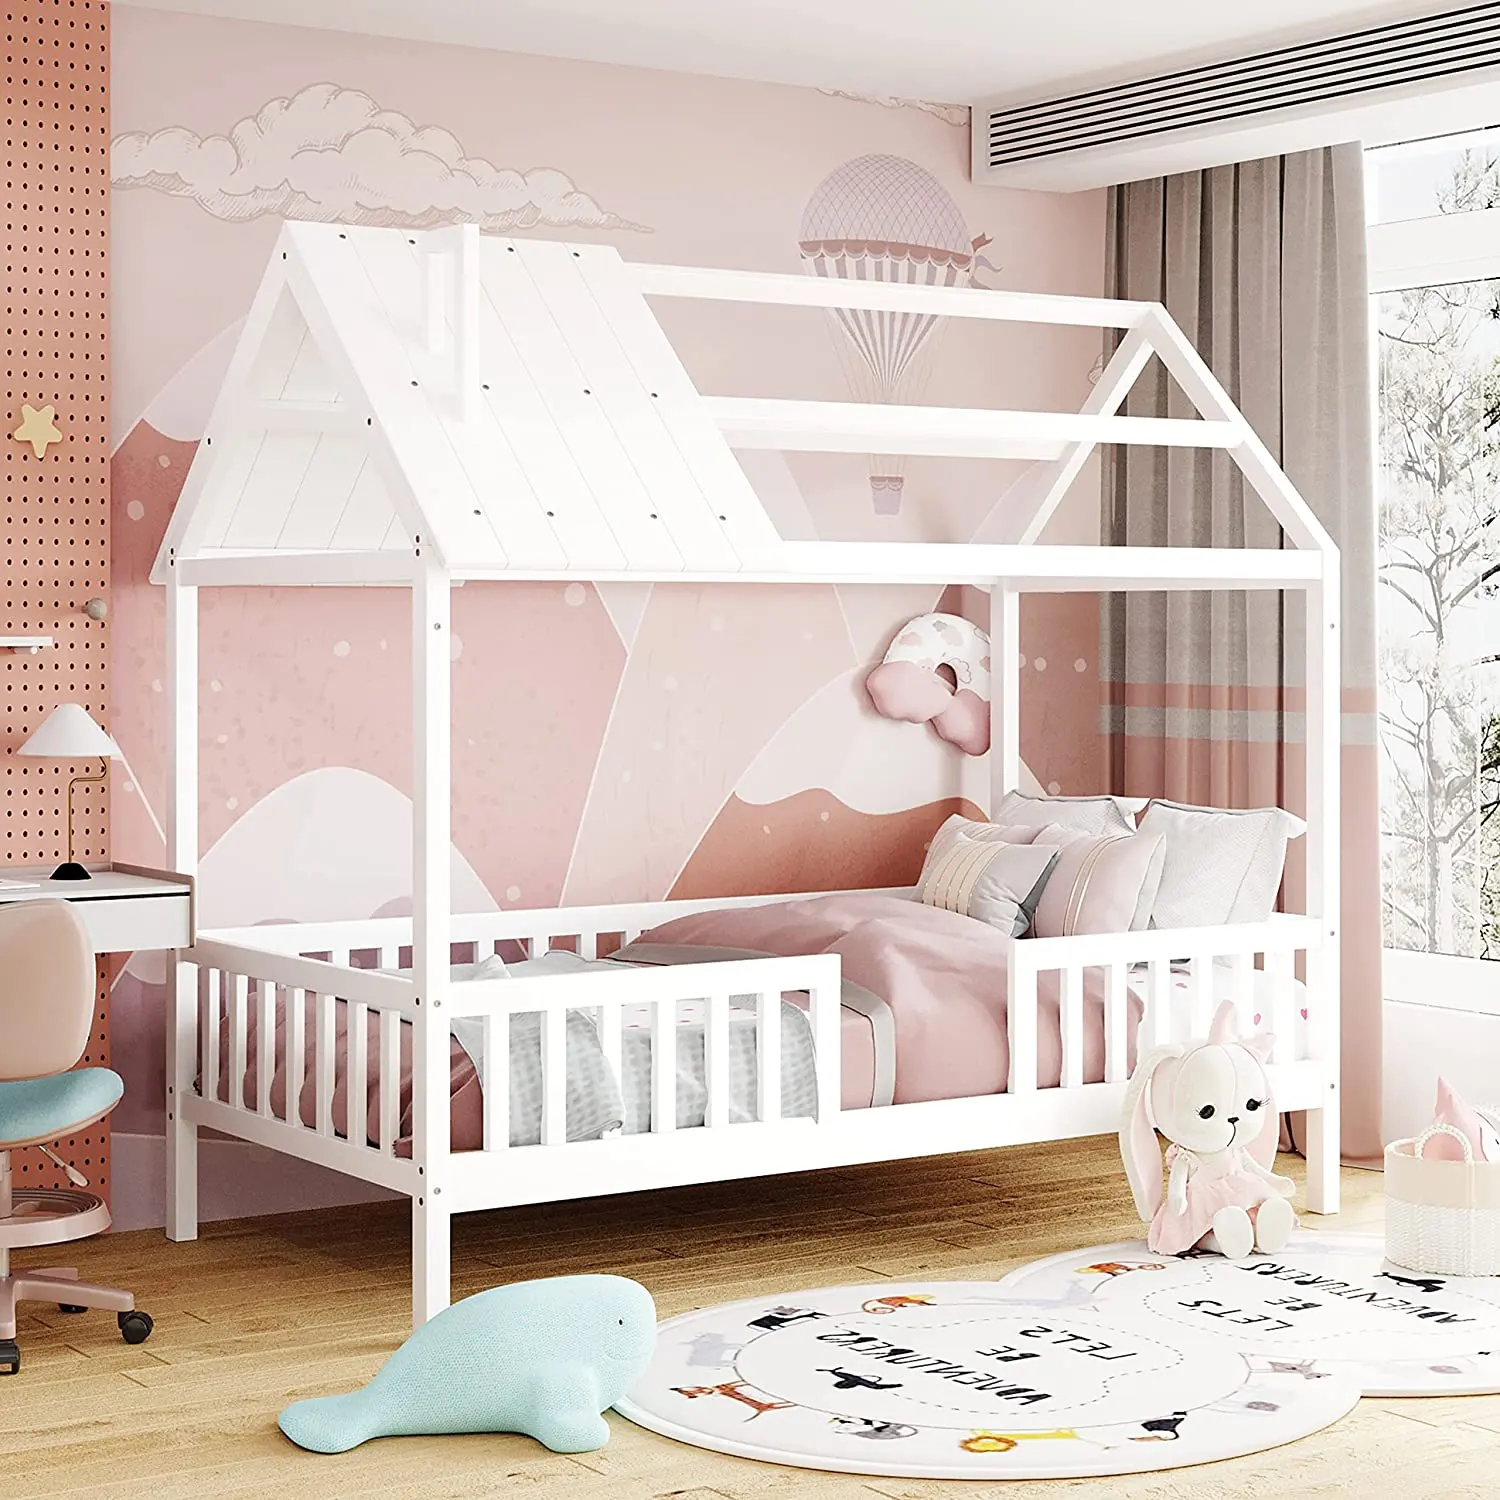 Hot Sale Single Size Kids House Bed Wooden Kids Bed Frame with Roof and Fence for Living Room Bedroom Kids' Beds Boy